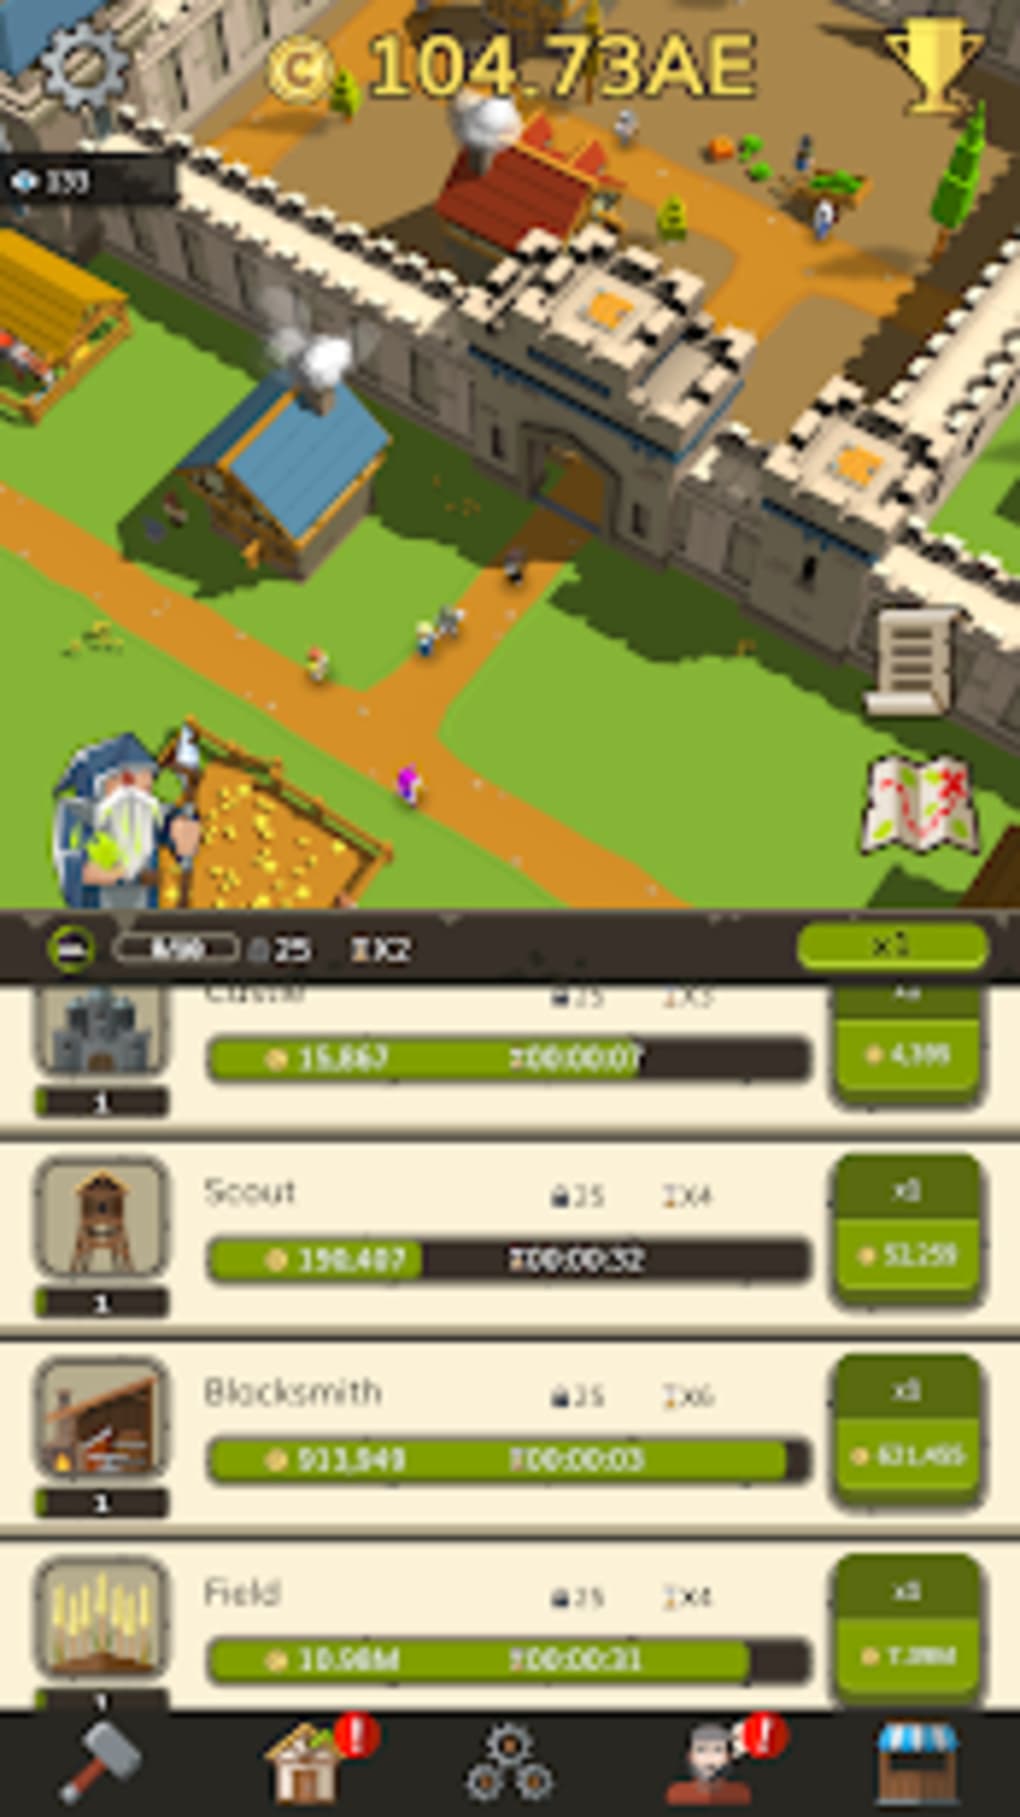 Video Game Tycoon: Magnata – Apps no Google Play